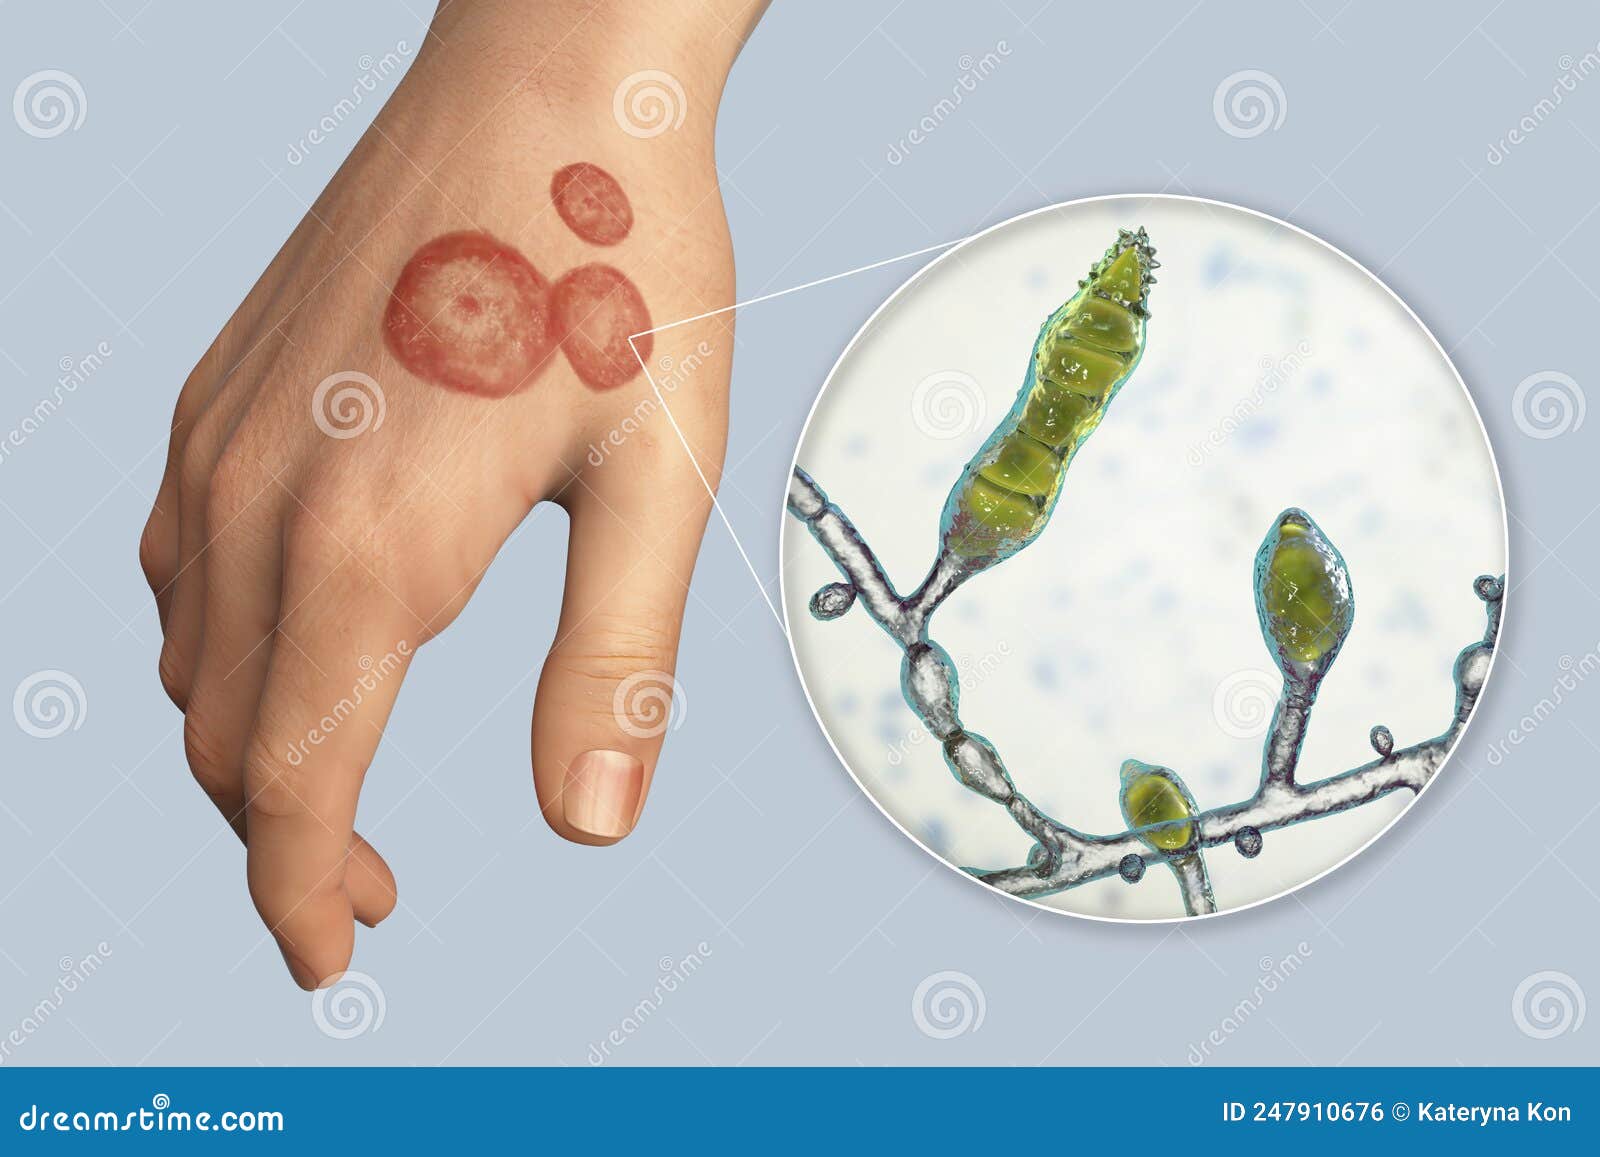 Hand Fungal Infection, Tinea Manuum, 3D Illustration Stock Illustration -  Illustration of dermatophyte, microscopic: 247910676